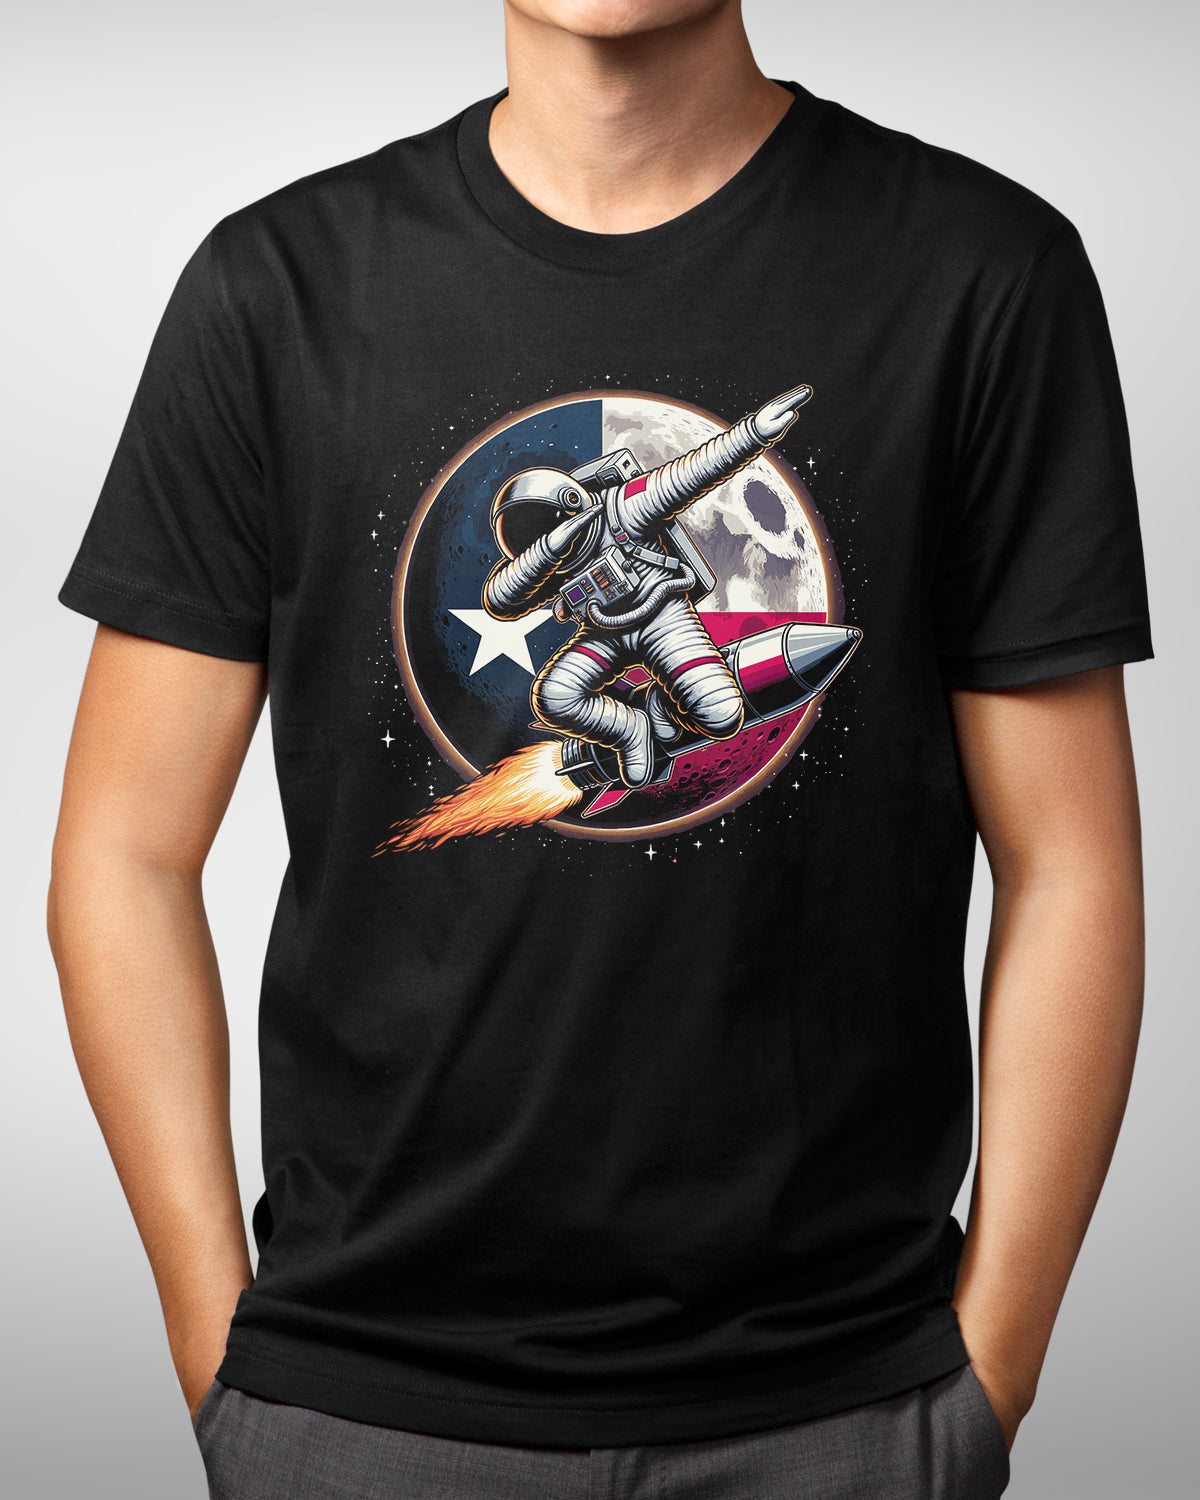 Space Dabbing Astronaut Shirt, Houston 1965 Themed Tee, Texas State Design, Outer Space Galaxy Gift for Baseball and Astronomy Lovers